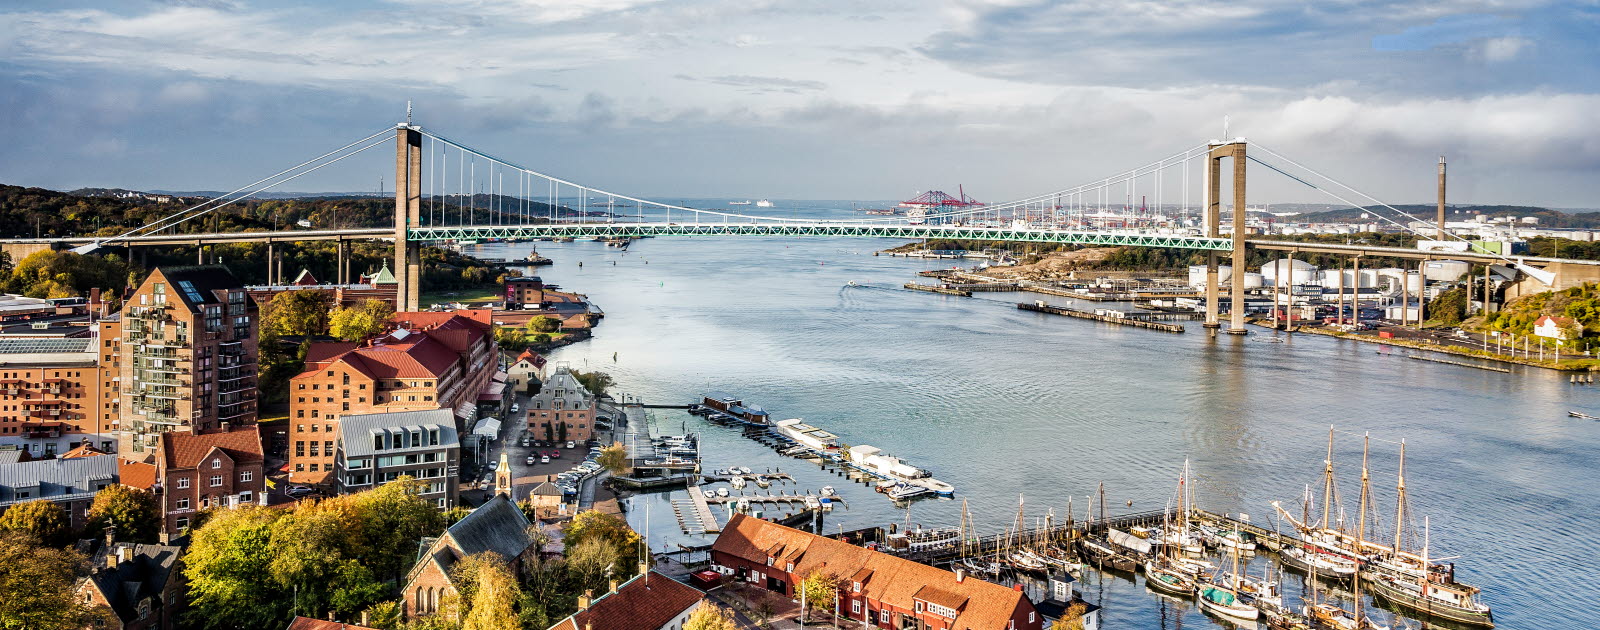 Gothenburg, or Göteborg, on Sweden’s west coast, is second in population only to the capital, Stockholm. Home of Volvo and two major universities, the city also holds several major cultural and sporting events. The Port of Gothenburg, seen in the bac